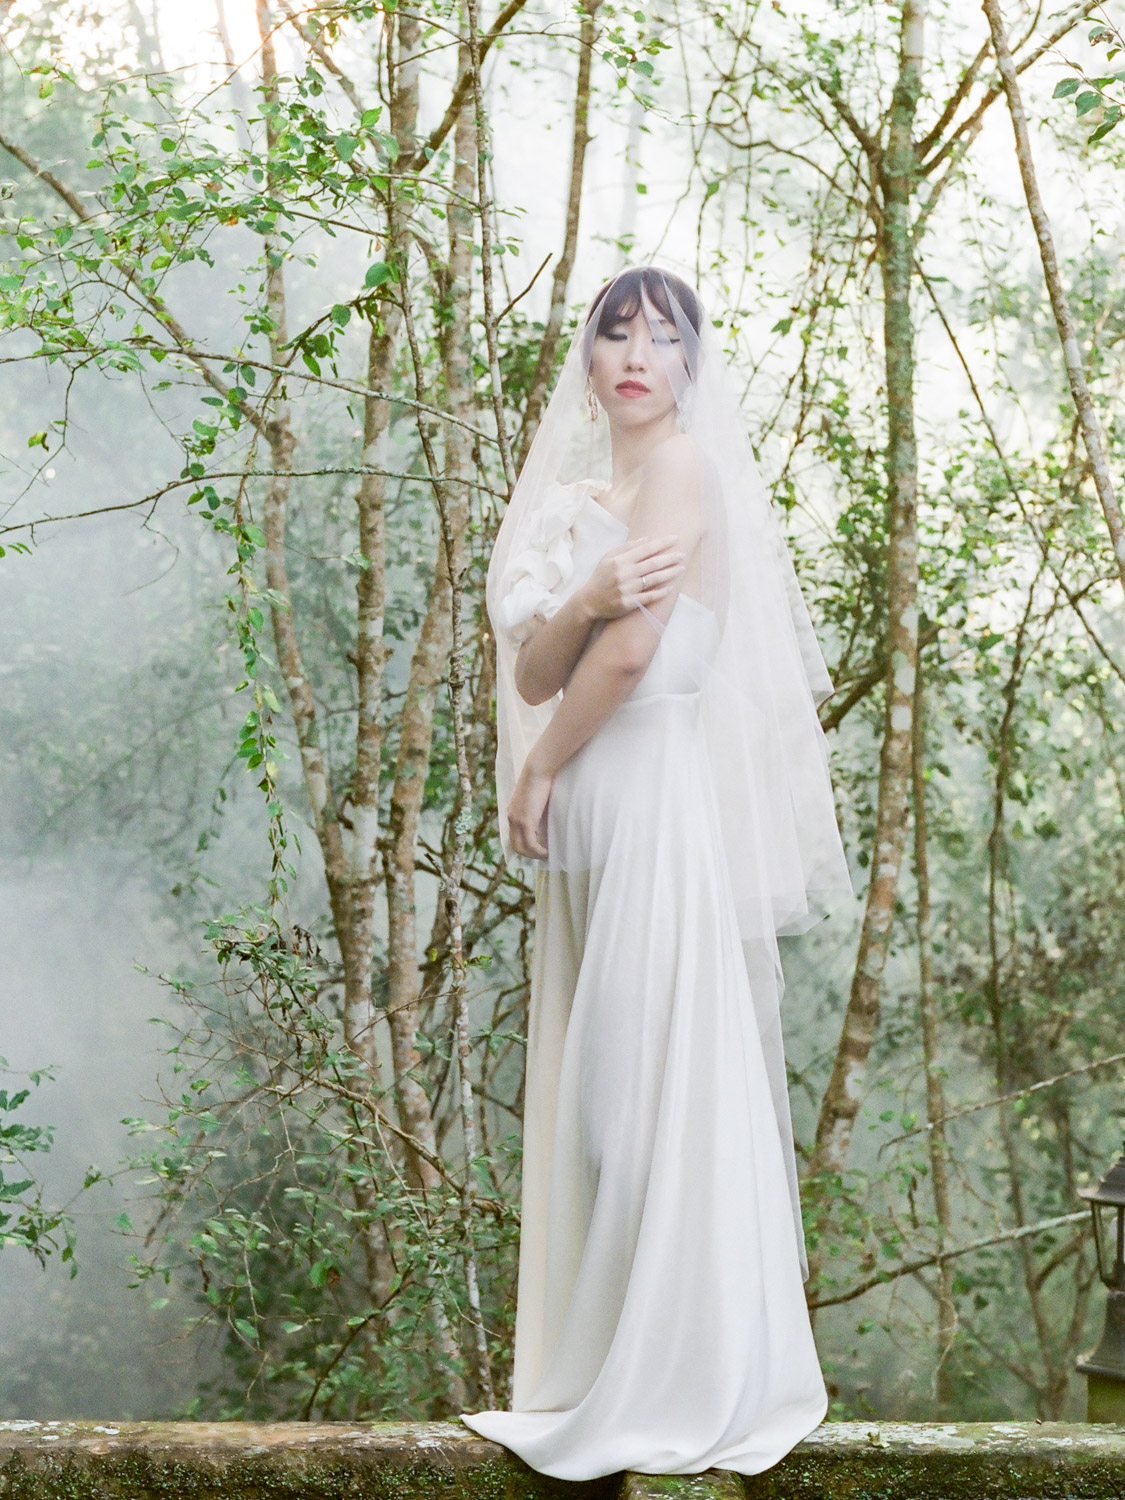 Bride in Wedding gown with veil